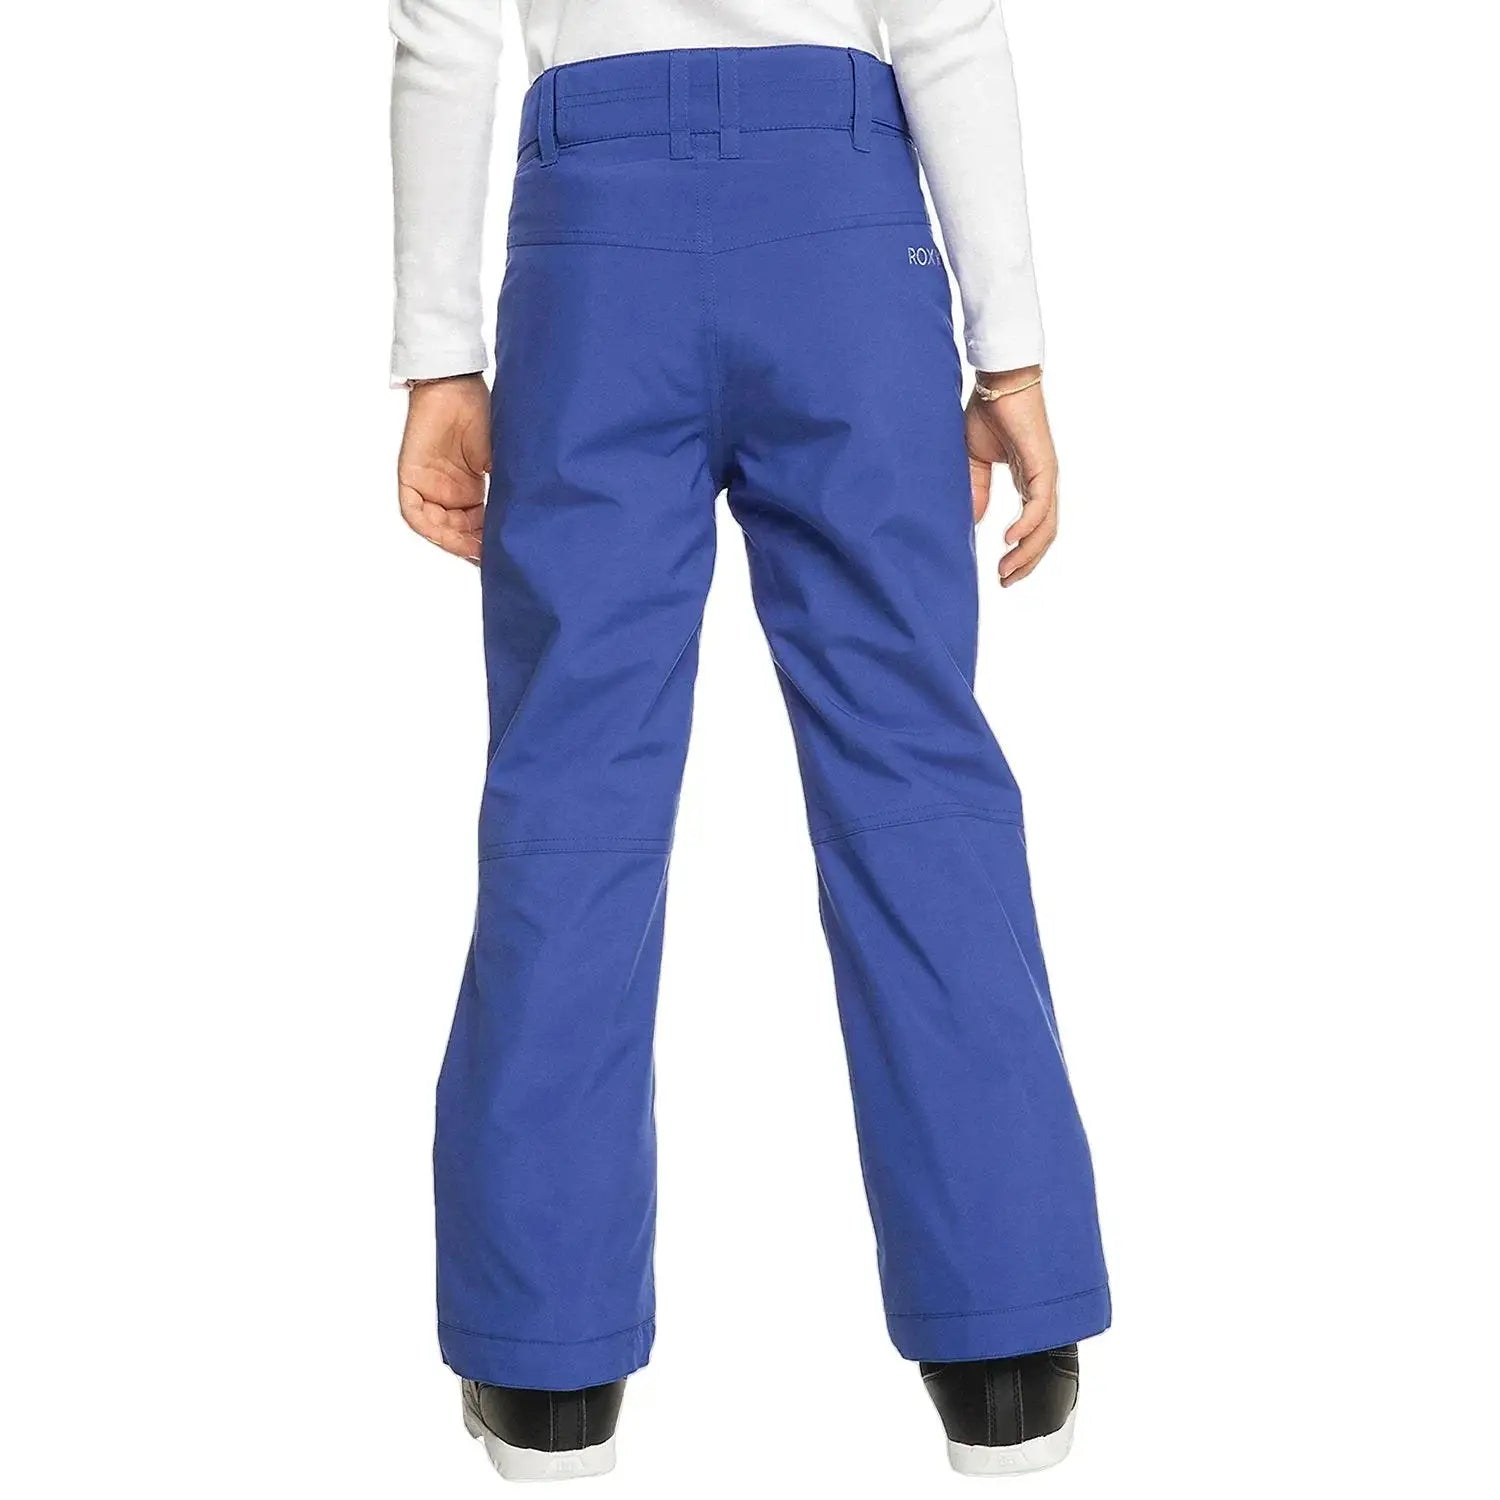 Roxy Girl's Backyard Snowpants shown in the Bluing color option. Back view.